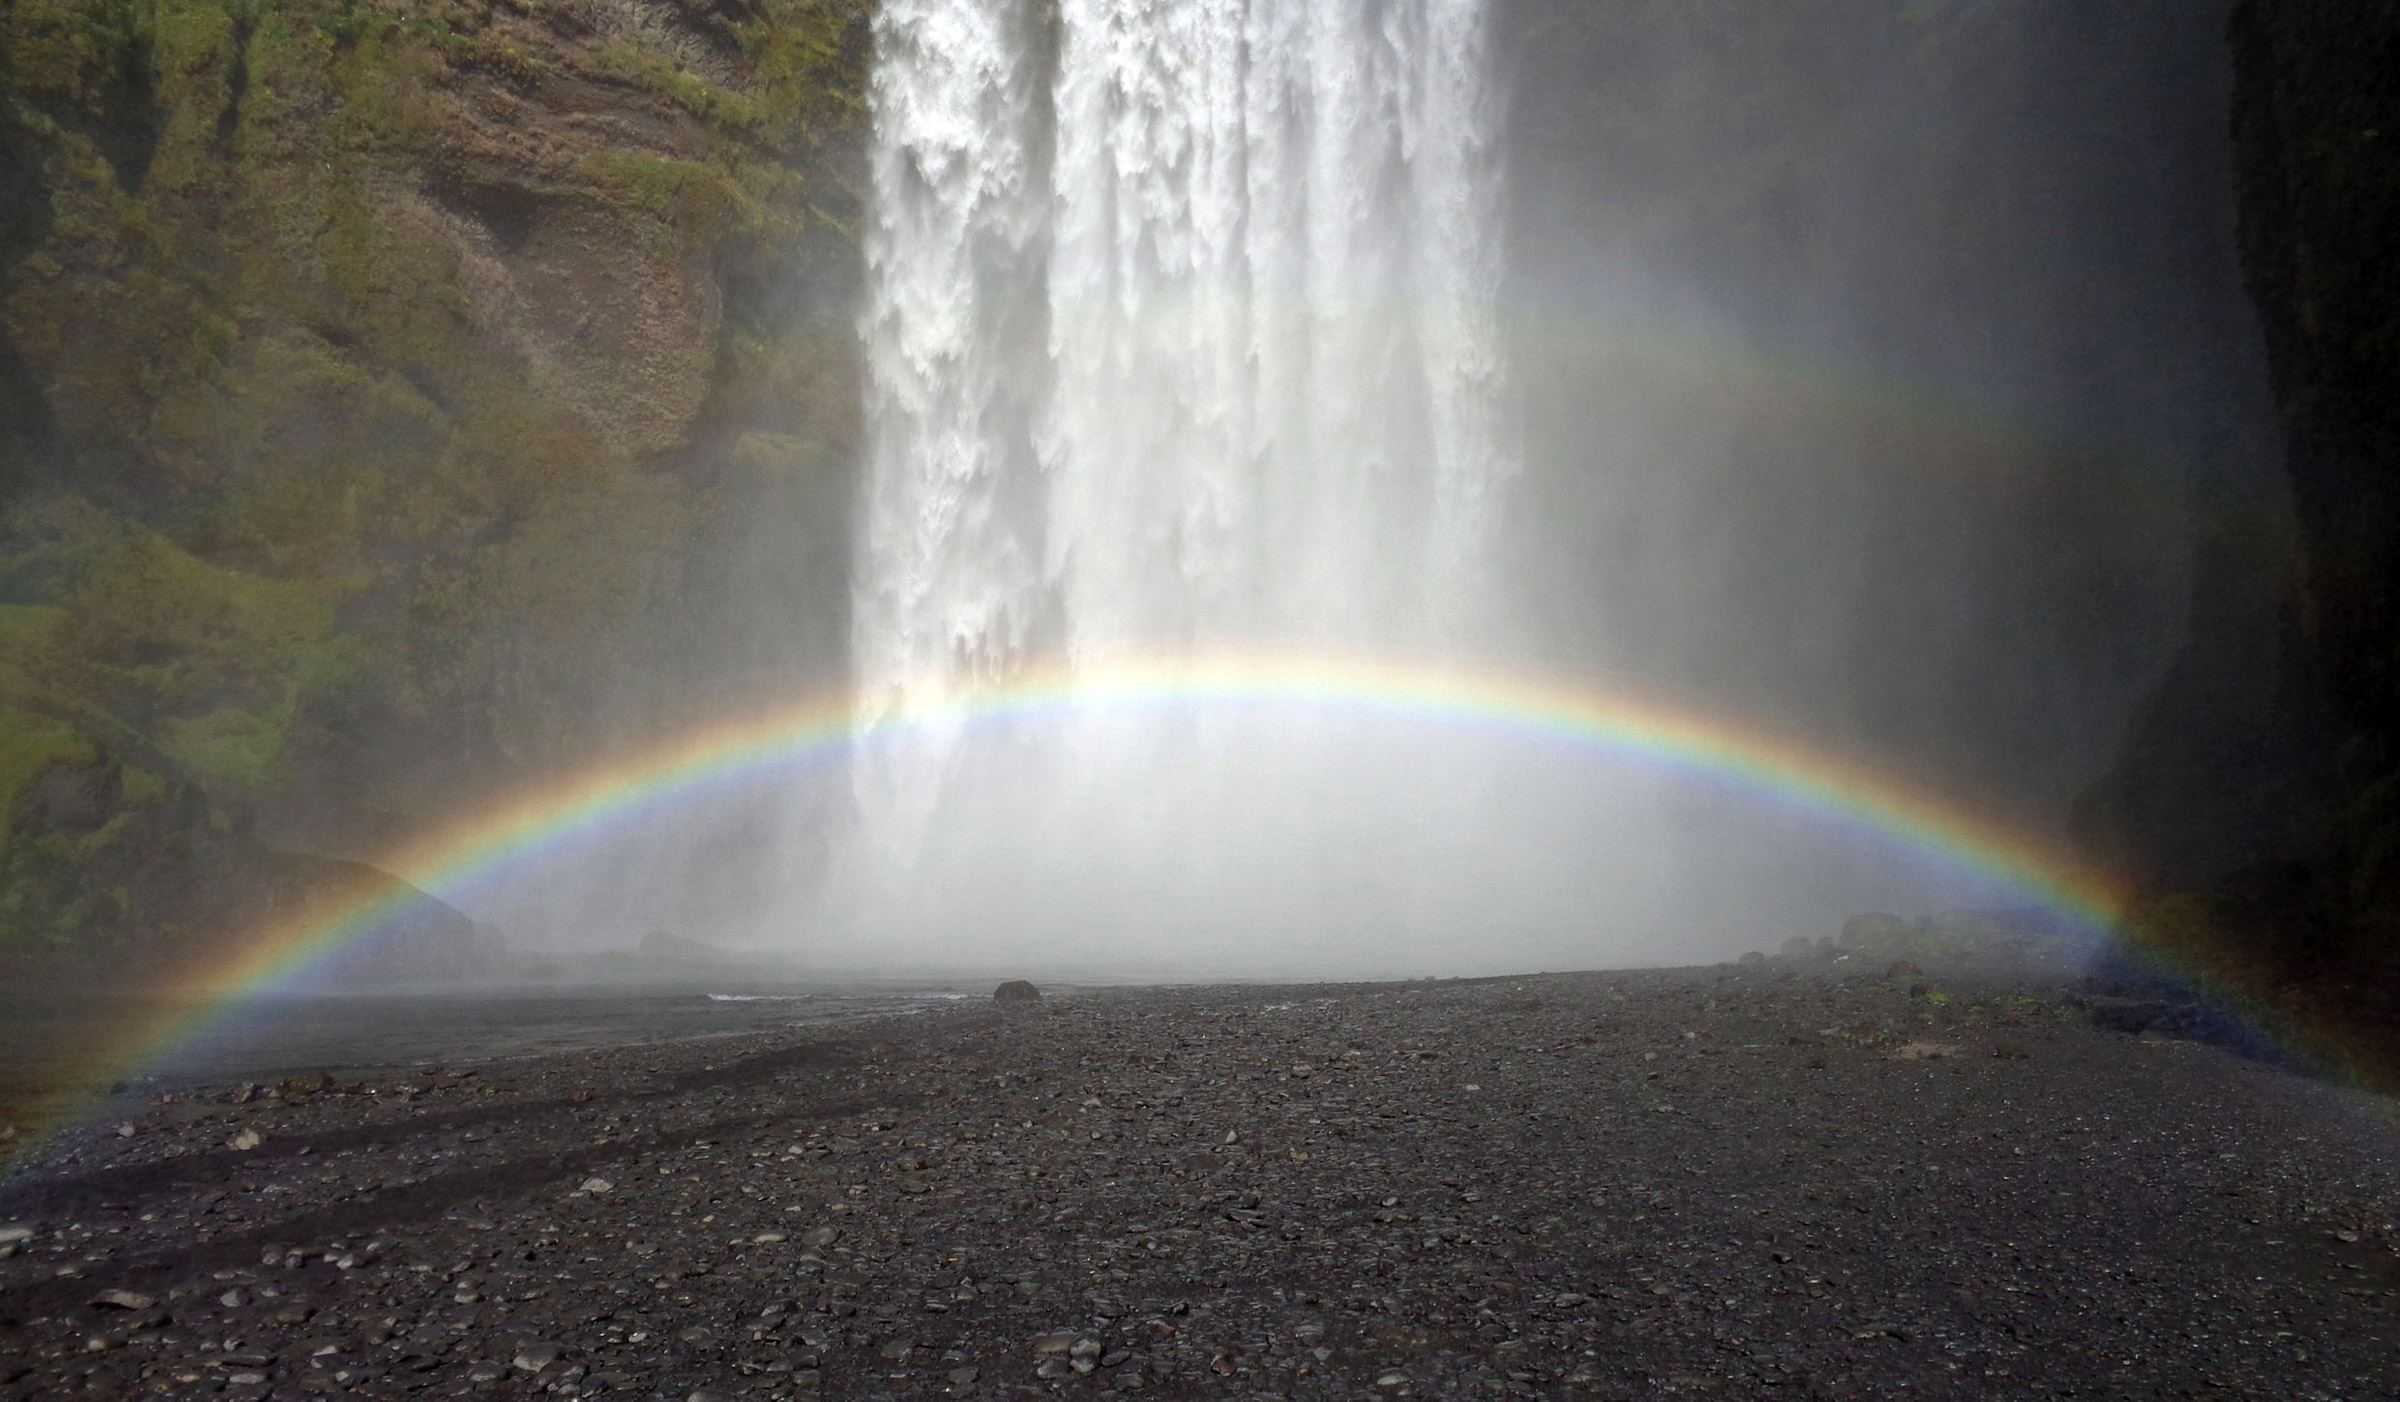 Double rainbow in front of waterfall.